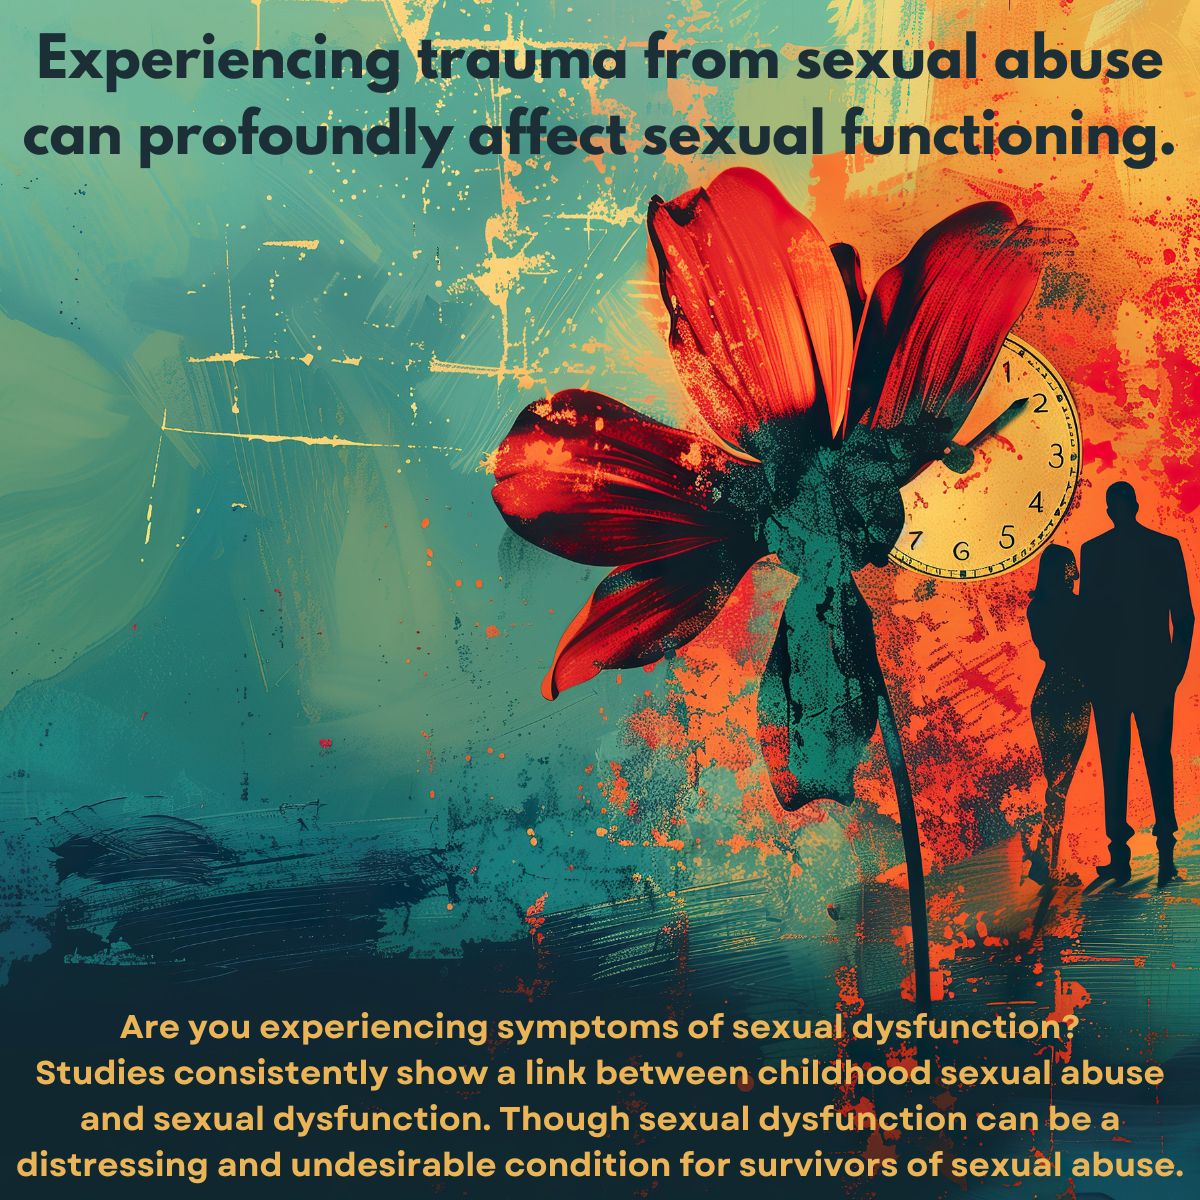 👉Psychosexual Counselling | Lena Fenton
#abuse #abuserecovery #sexualdysfunction #psychosexualtherapy #trauma